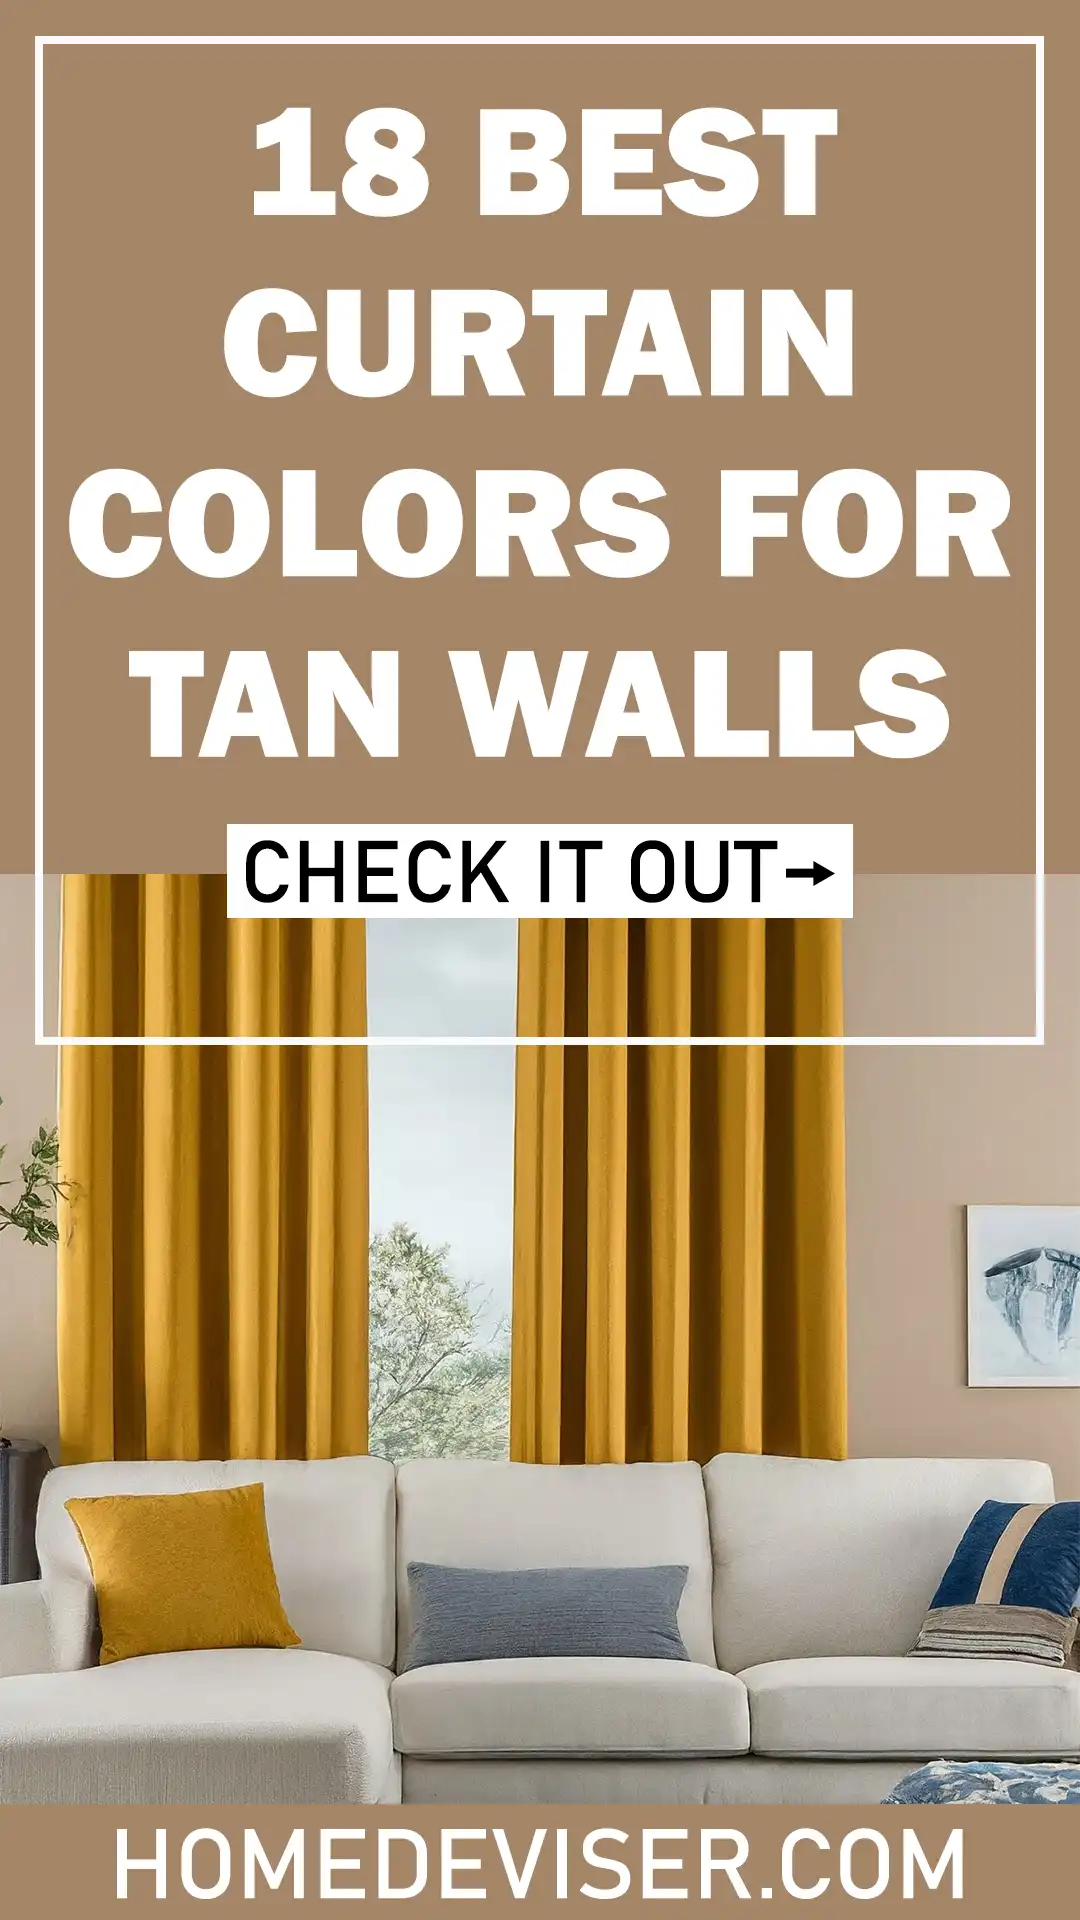 Best Curtain Colors for Tan Walls